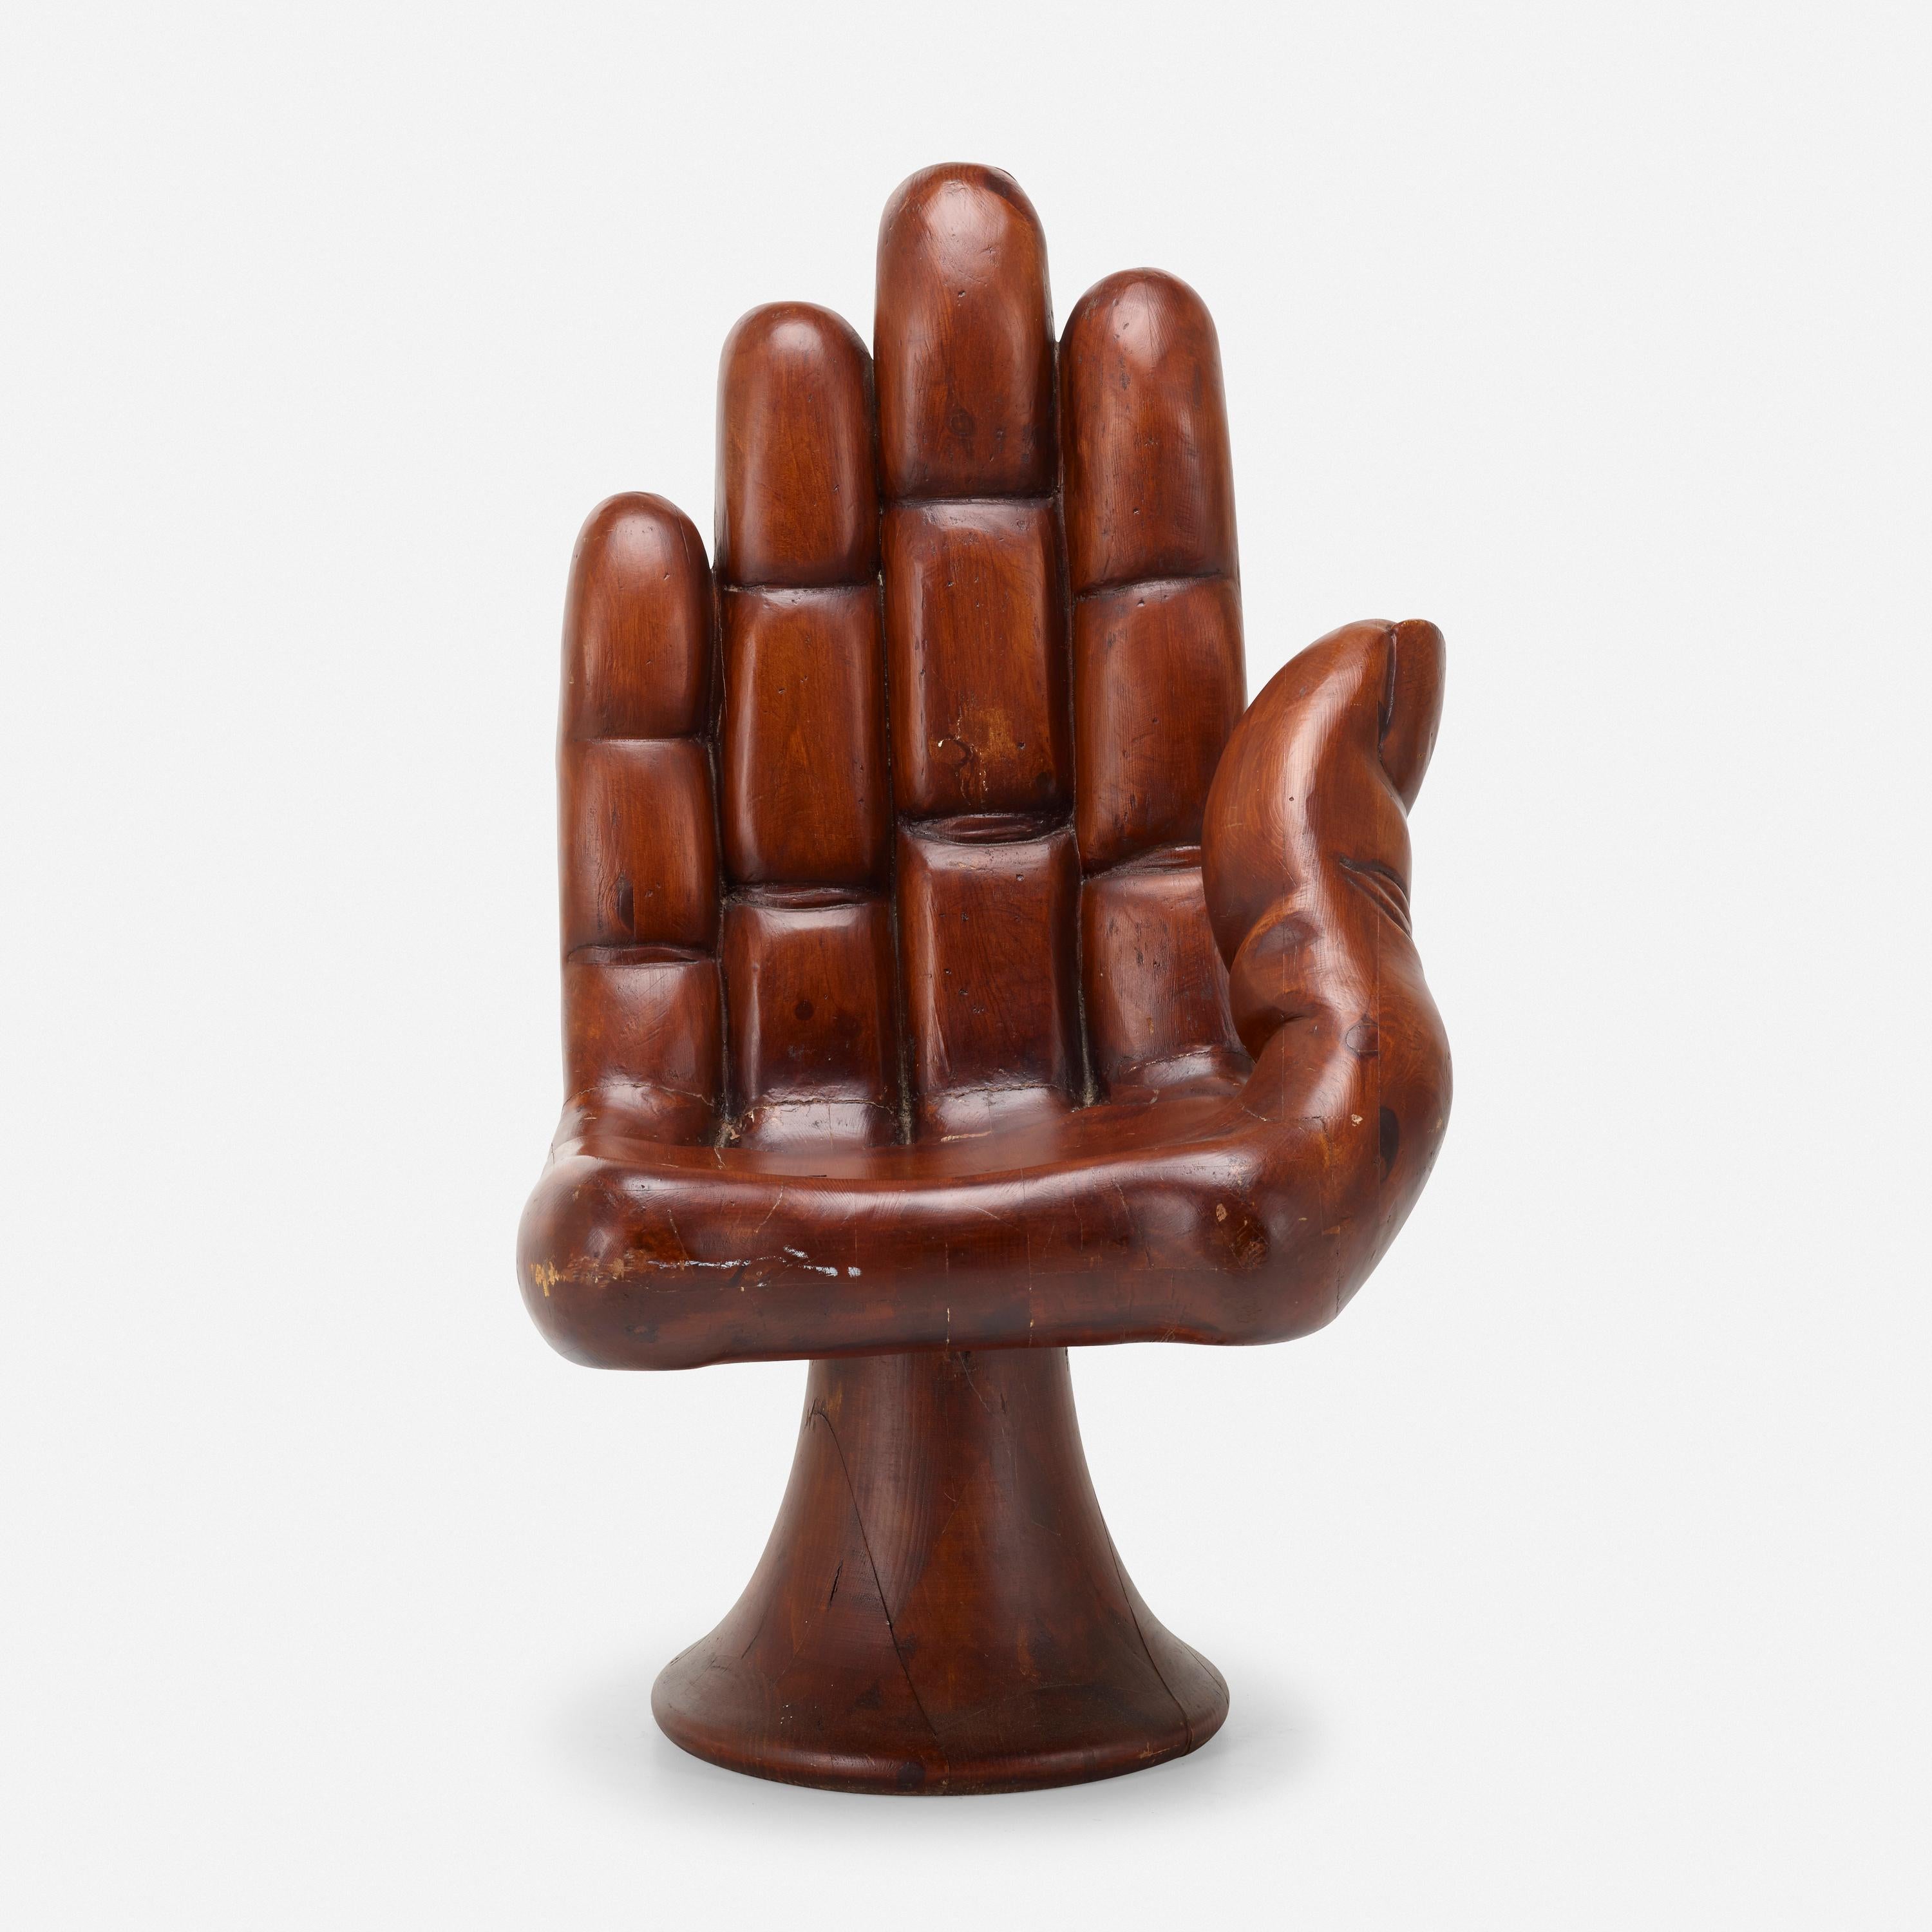 Carved Walnut Pedro Friedeberg style hand chair.